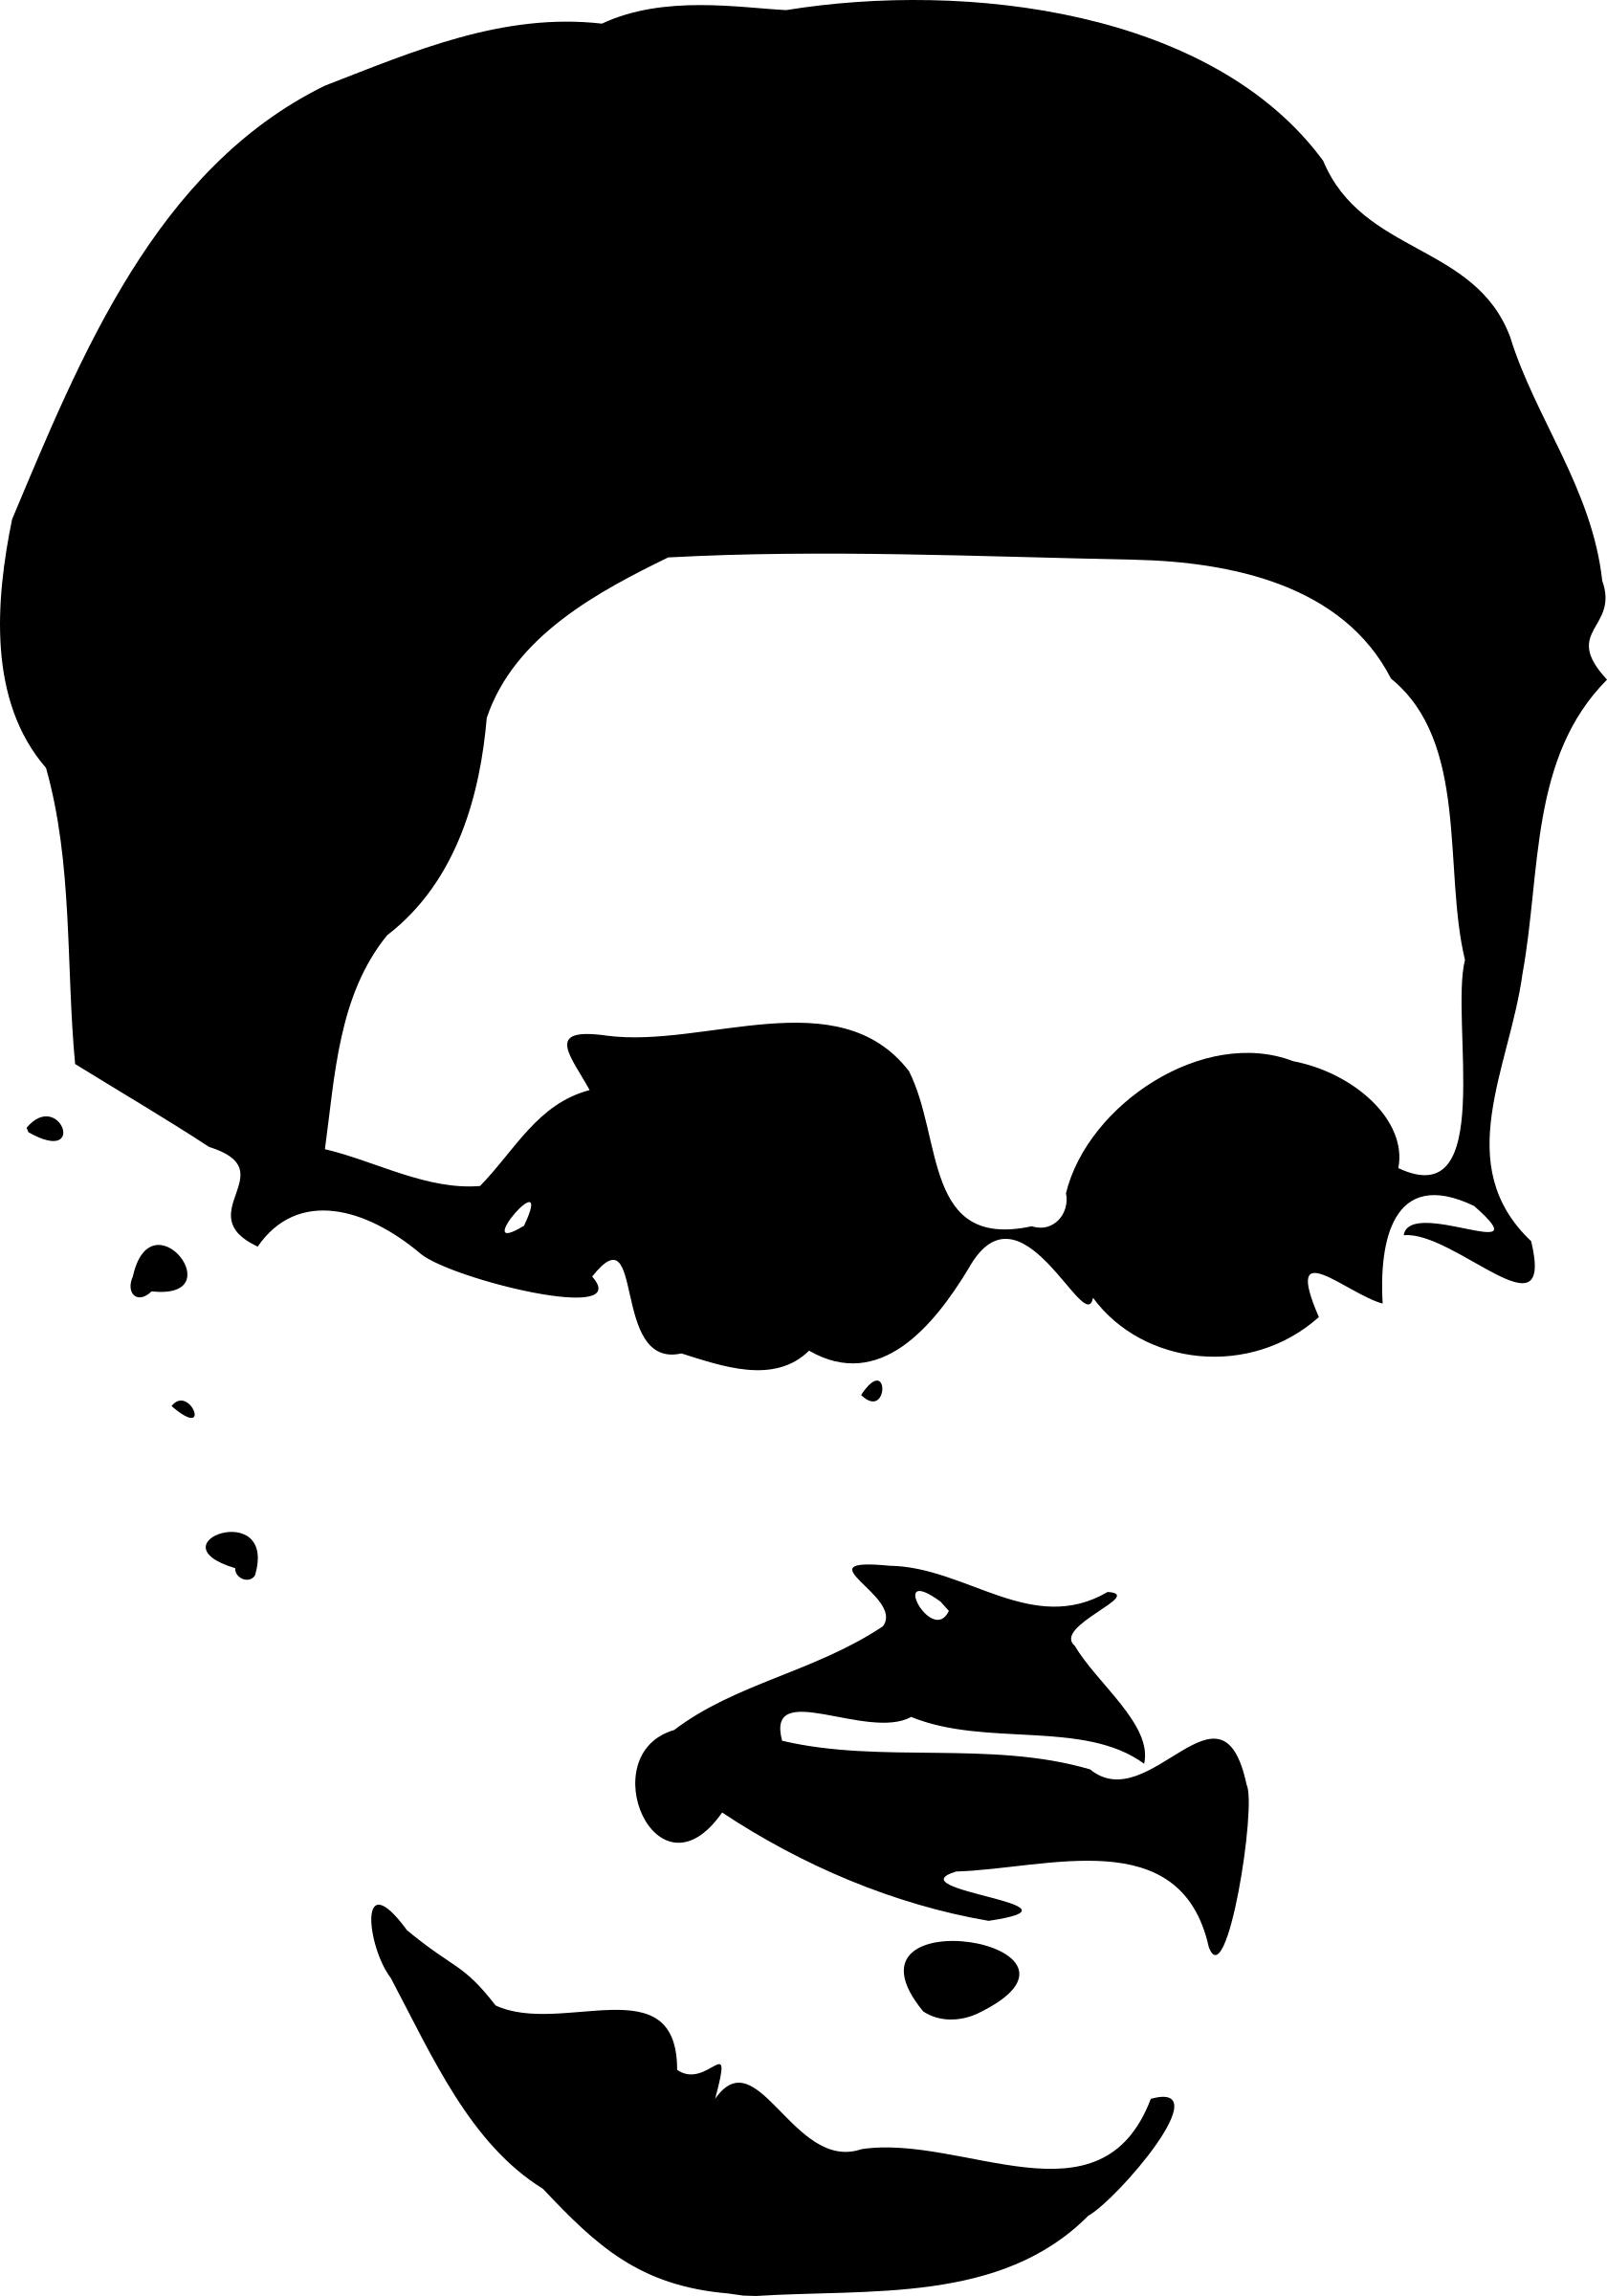 Snowden portrait bw PNG icons